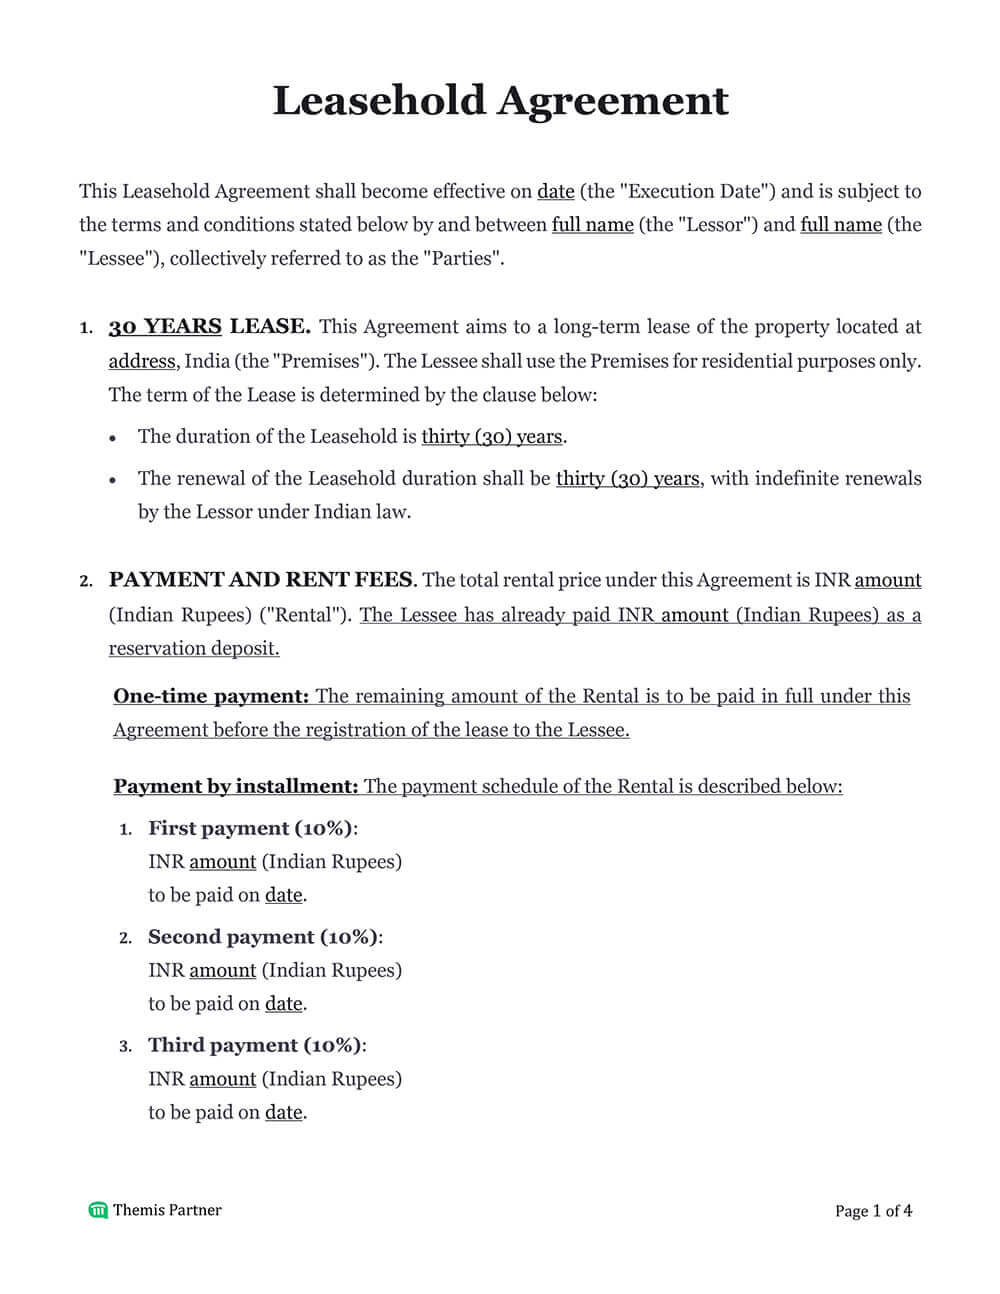 Leasehold agreement template